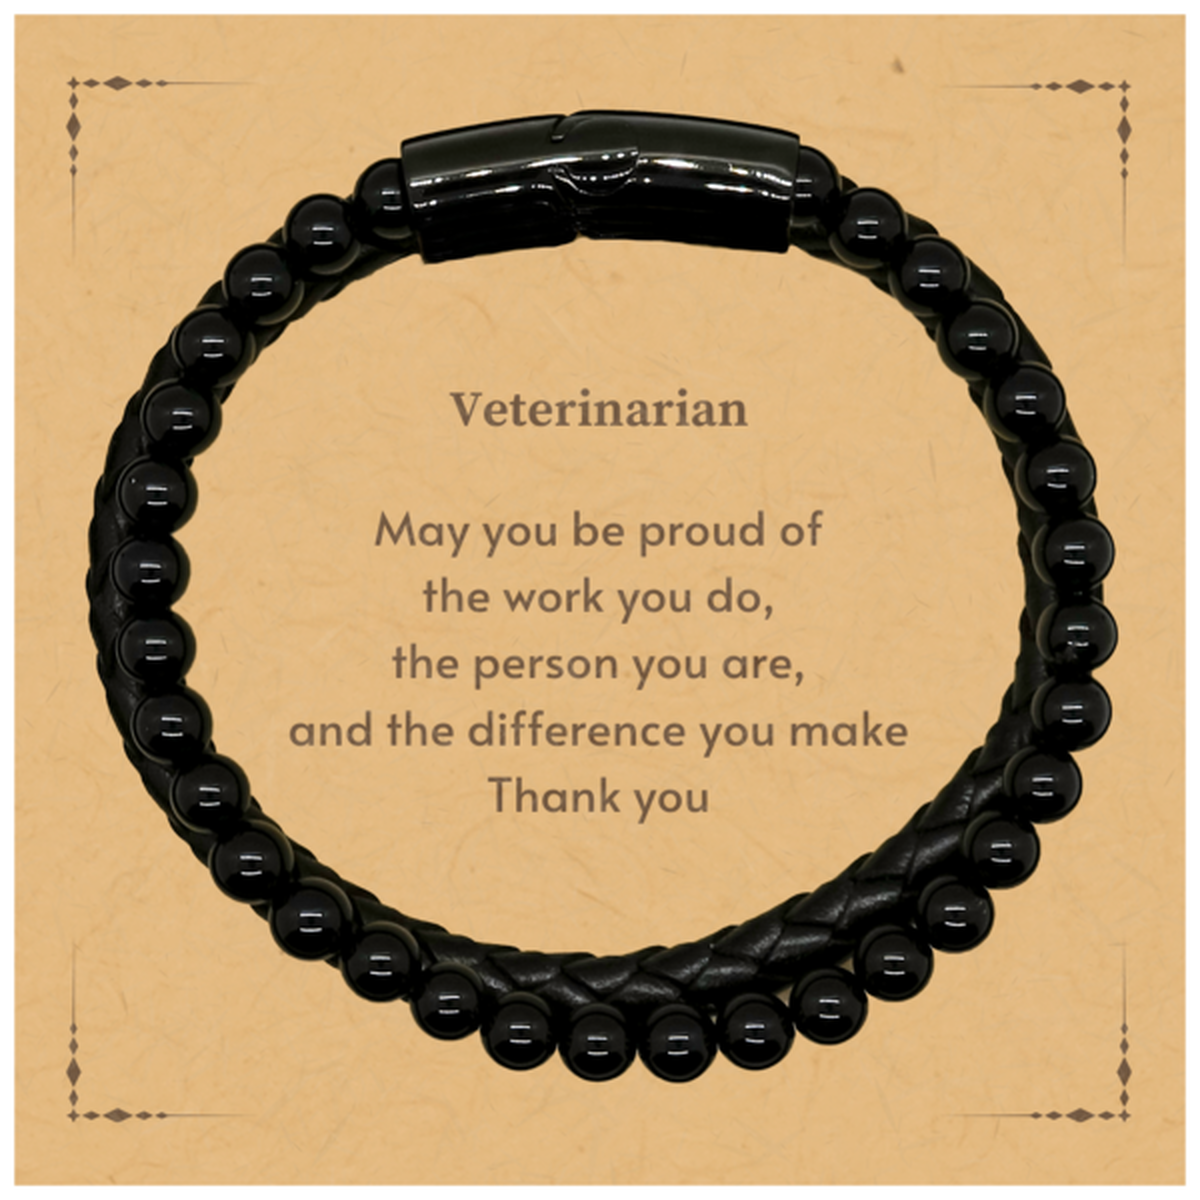 Heartwarming Stone Leather Bracelets Retirement Coworkers Gifts for Veterinarian, Veterinarian May You be proud of the work you do, the person you are Gifts for Boss Men Women Friends